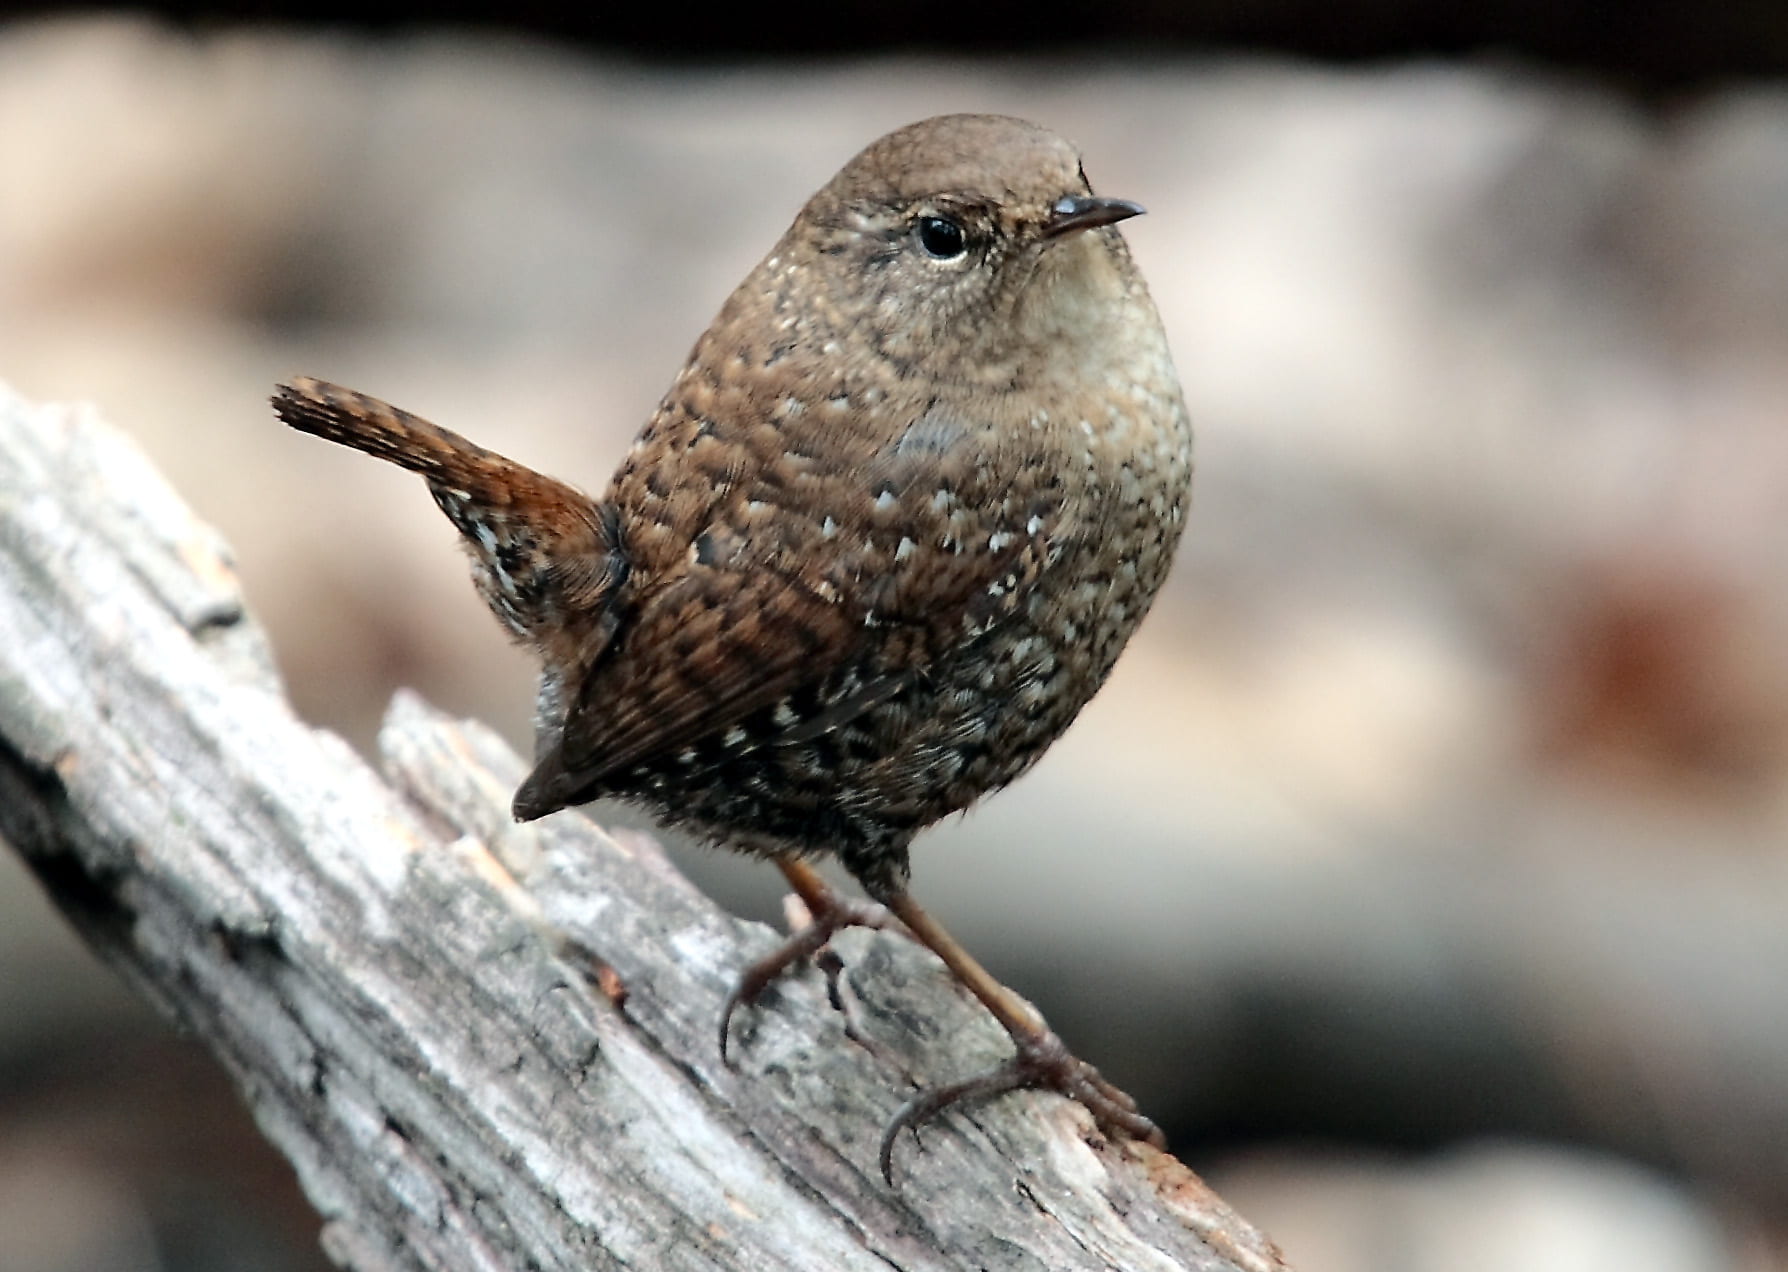 A small brown bird with small white spots sitting on a log.